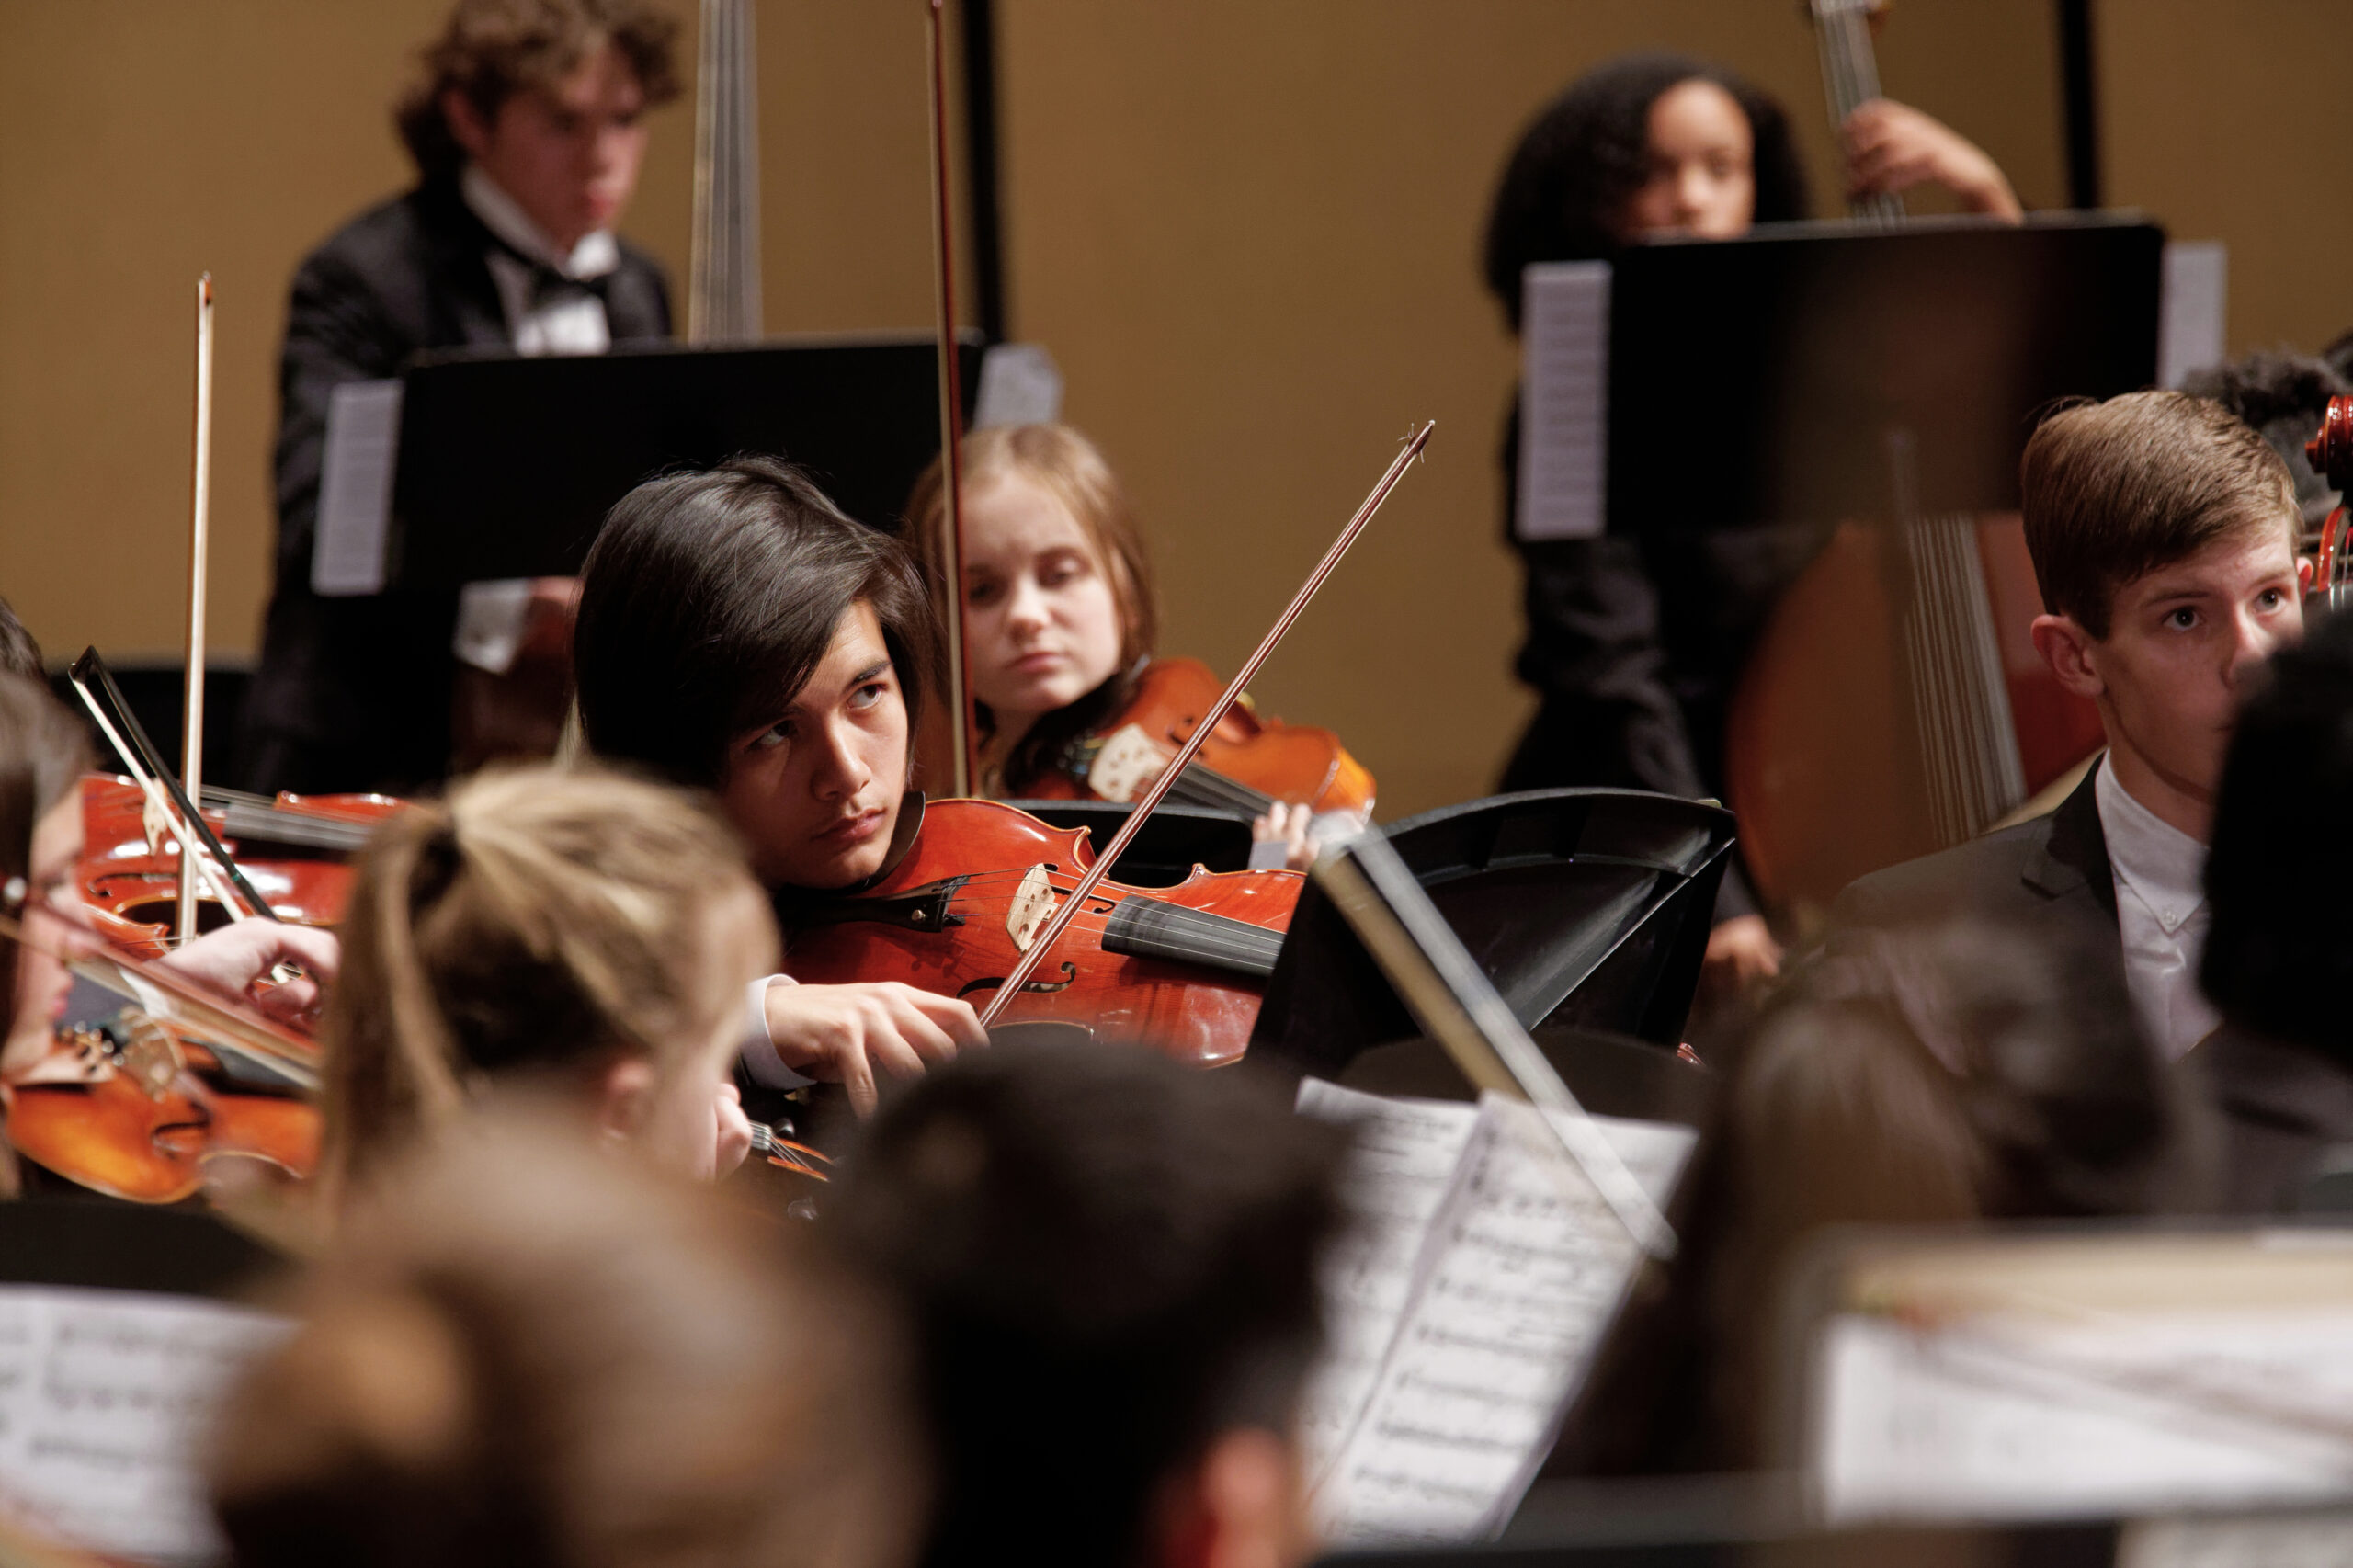 close up view of young people playing violin in an orchestra